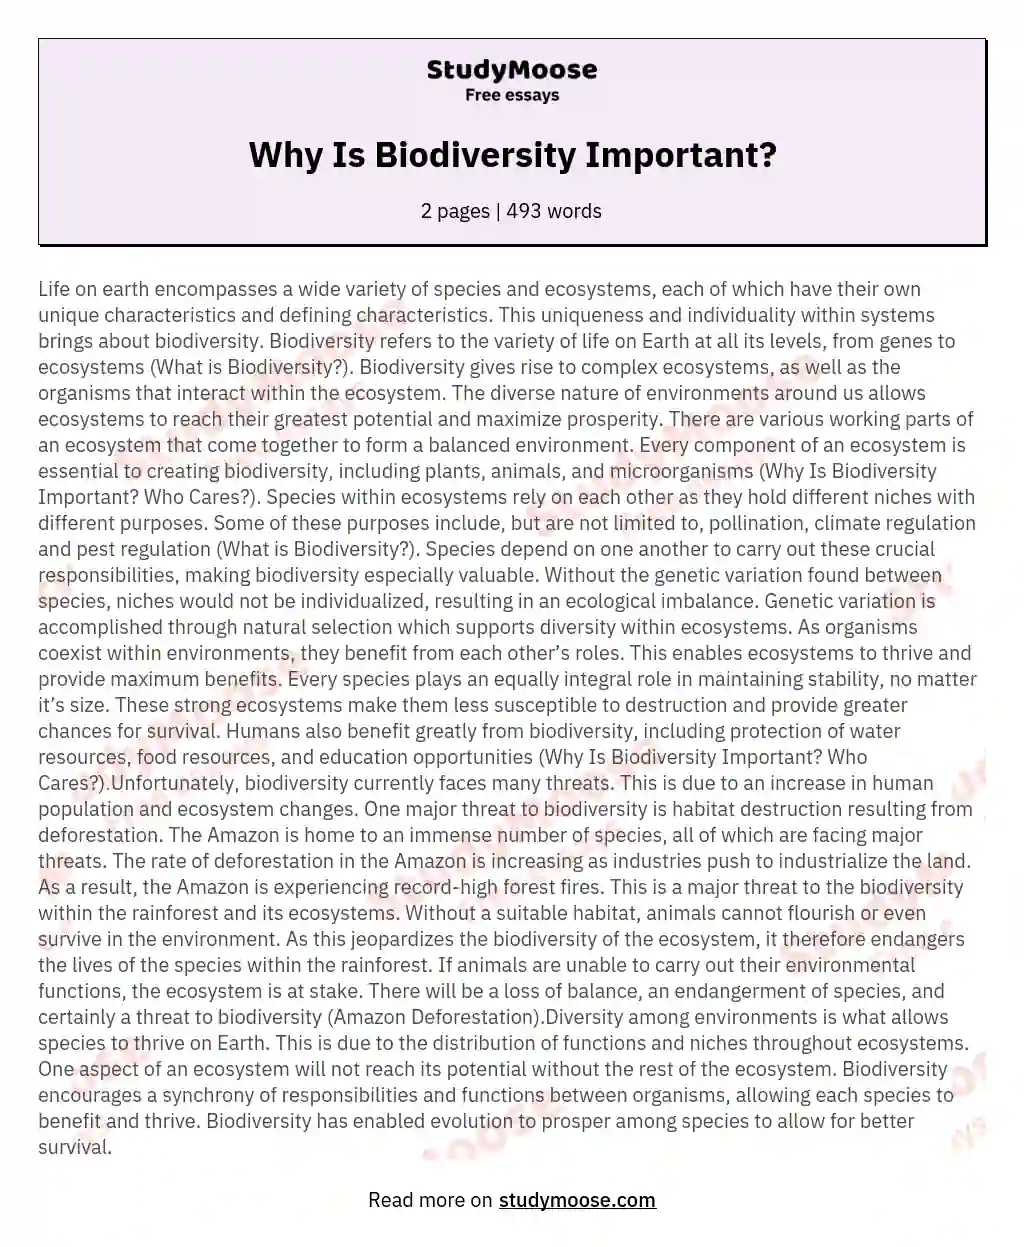 Why Is Biodiversity Important? essay